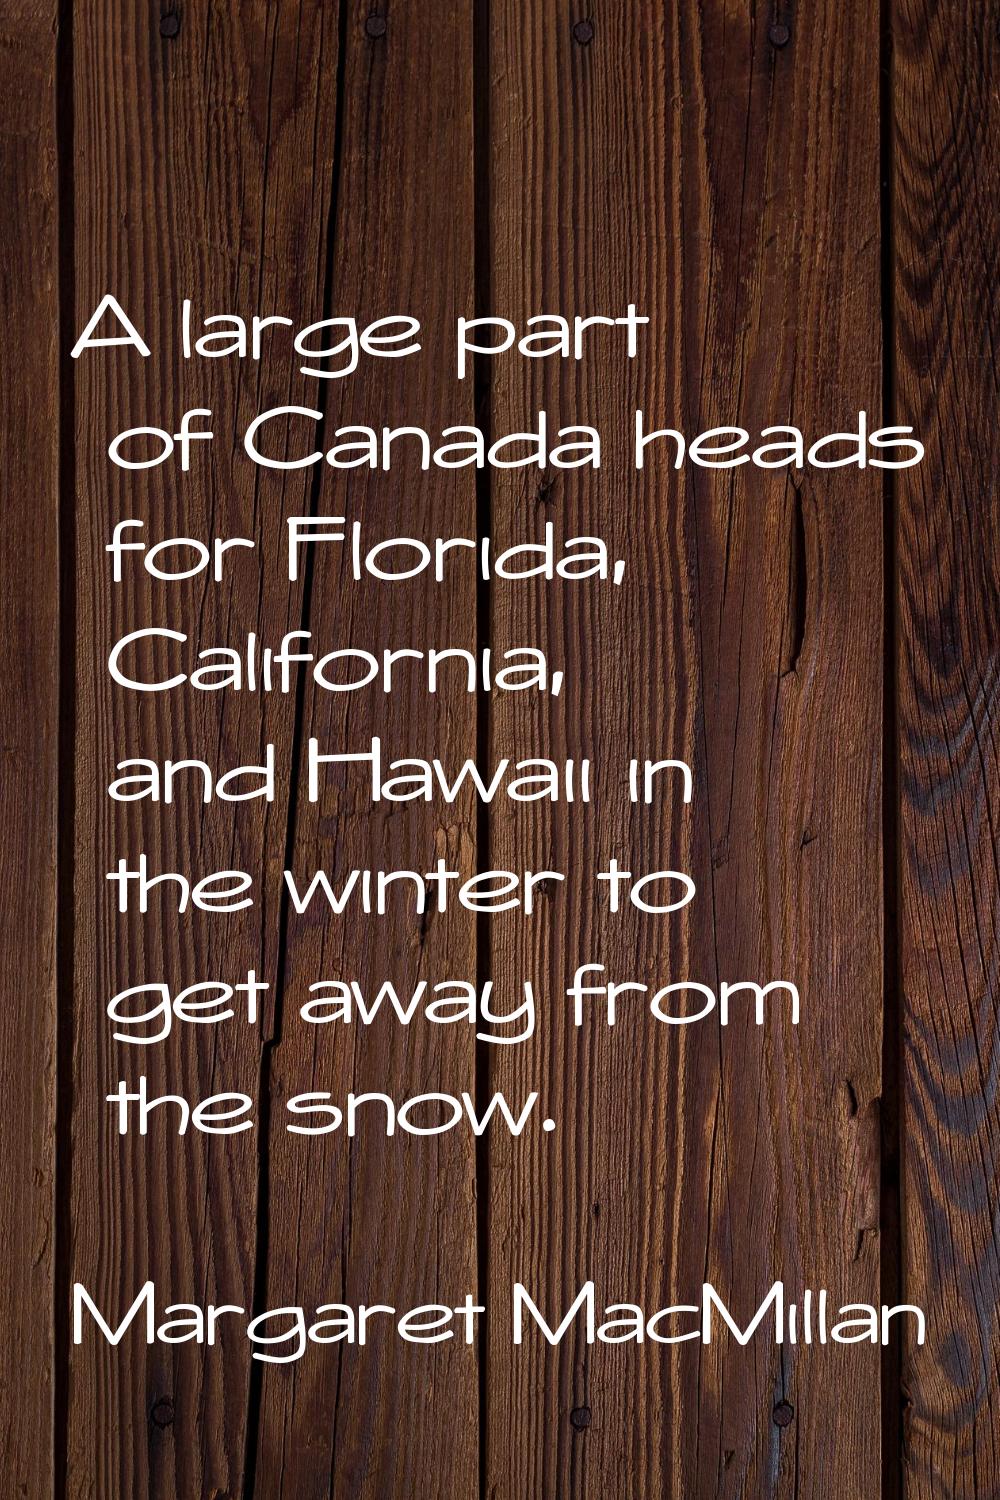 A large part of Canada heads for Florida, California, and Hawaii in the winter to get away from the